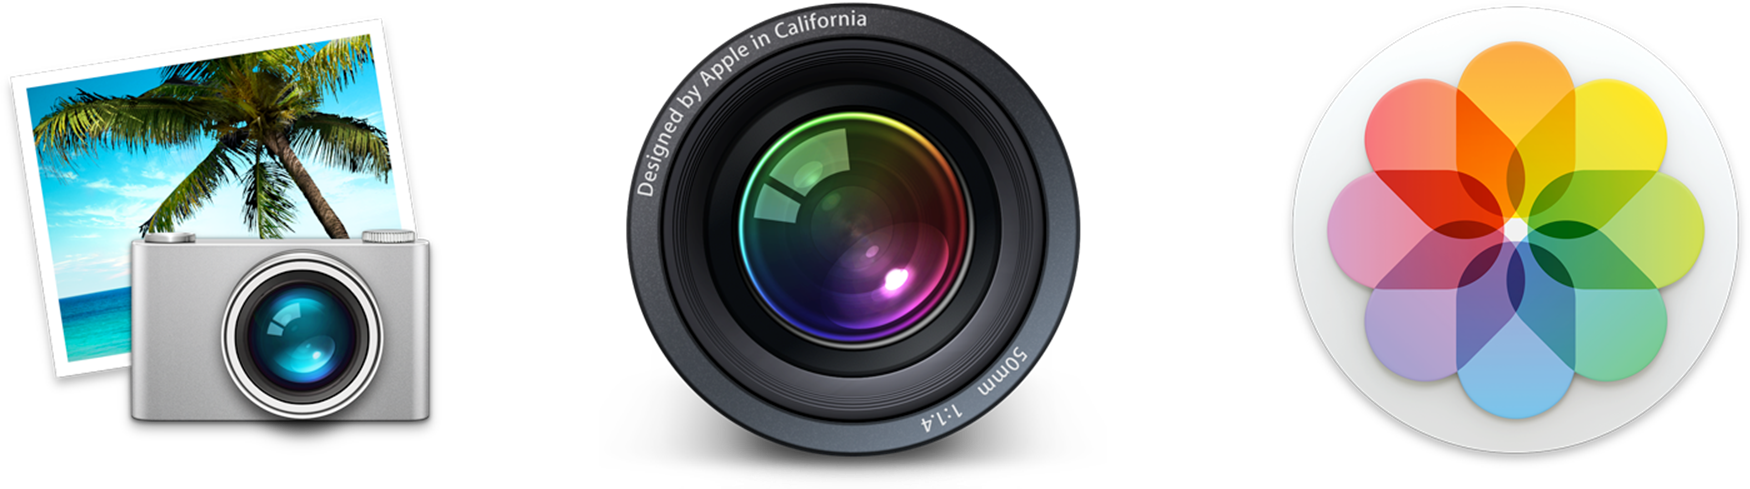 **①** iPhoto and Aperture have been discontinued. Apple intends Photos to be their replacement.